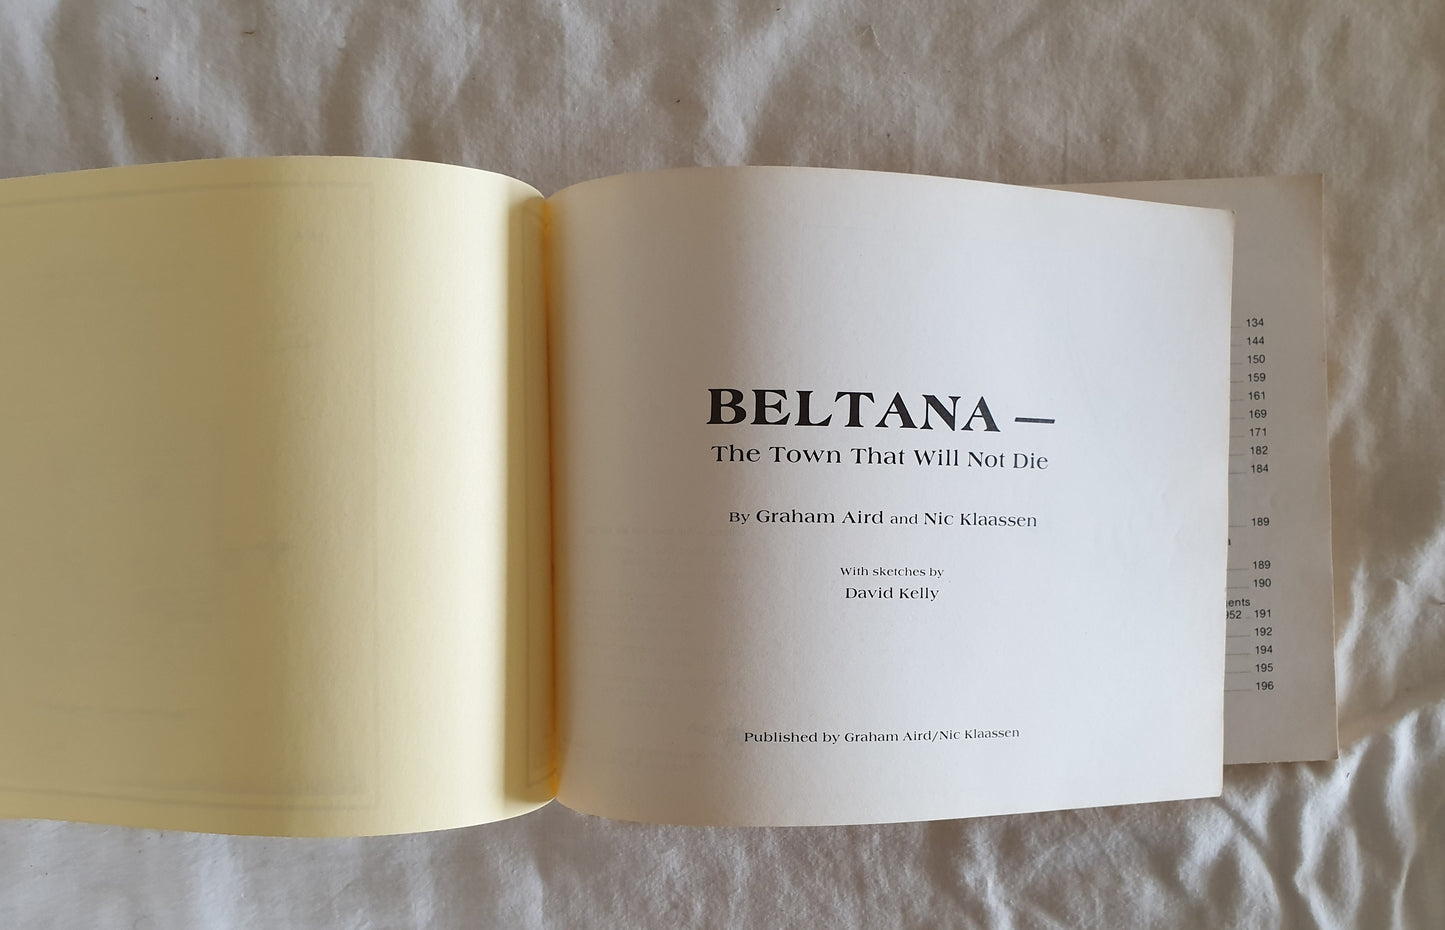 Beltana: The Town That Will Not Die by Graham Aird and Nic Klaassen